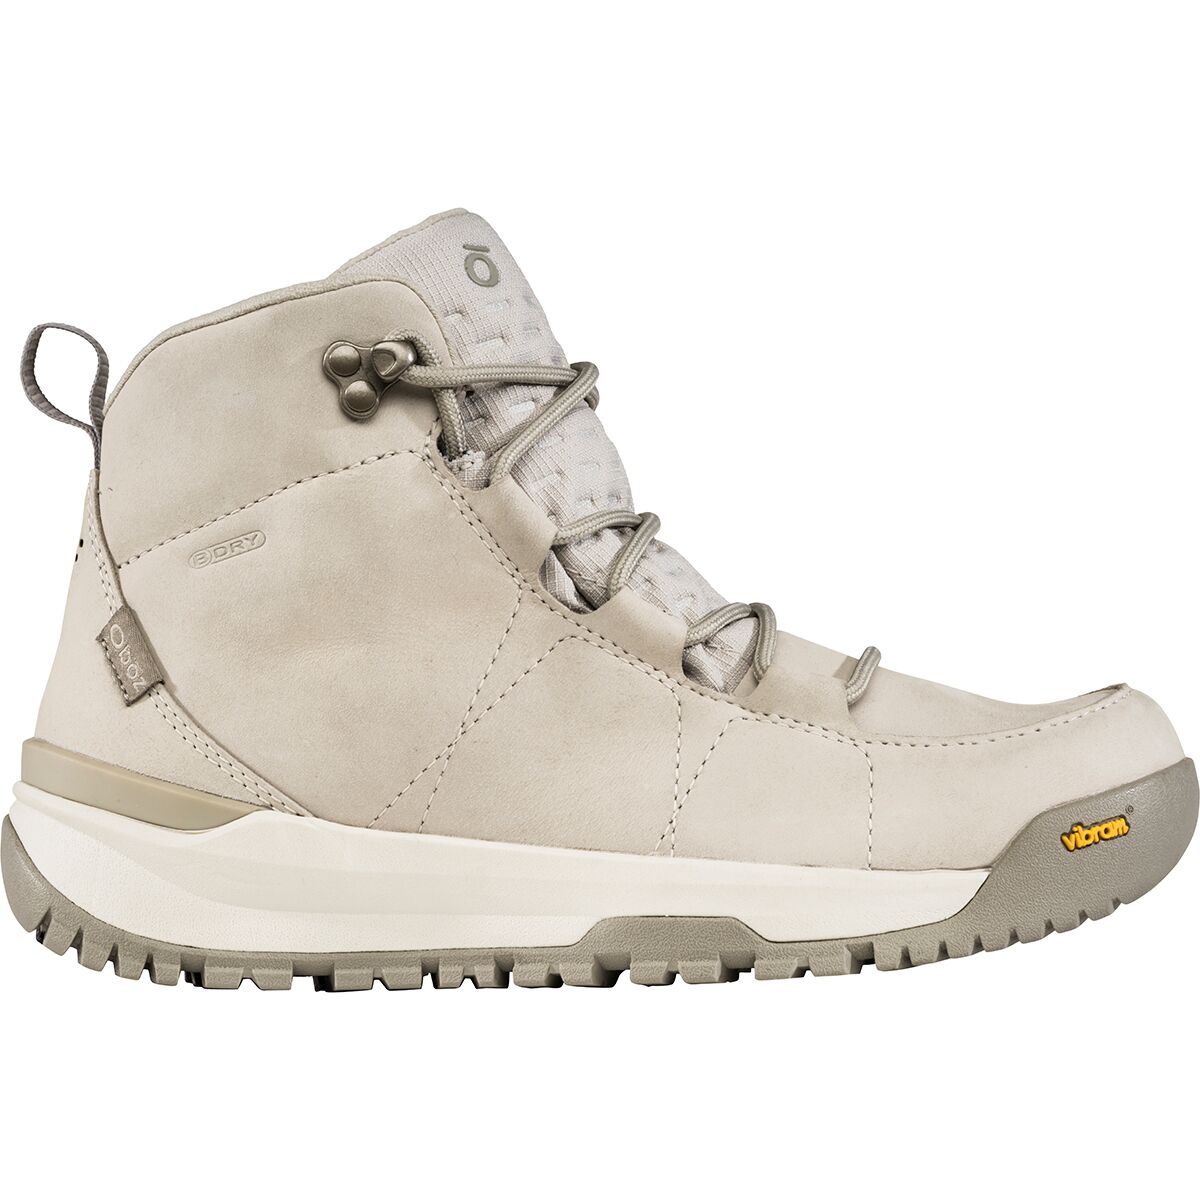 Sphinx Mid Insulated B-DRY Boot - Women